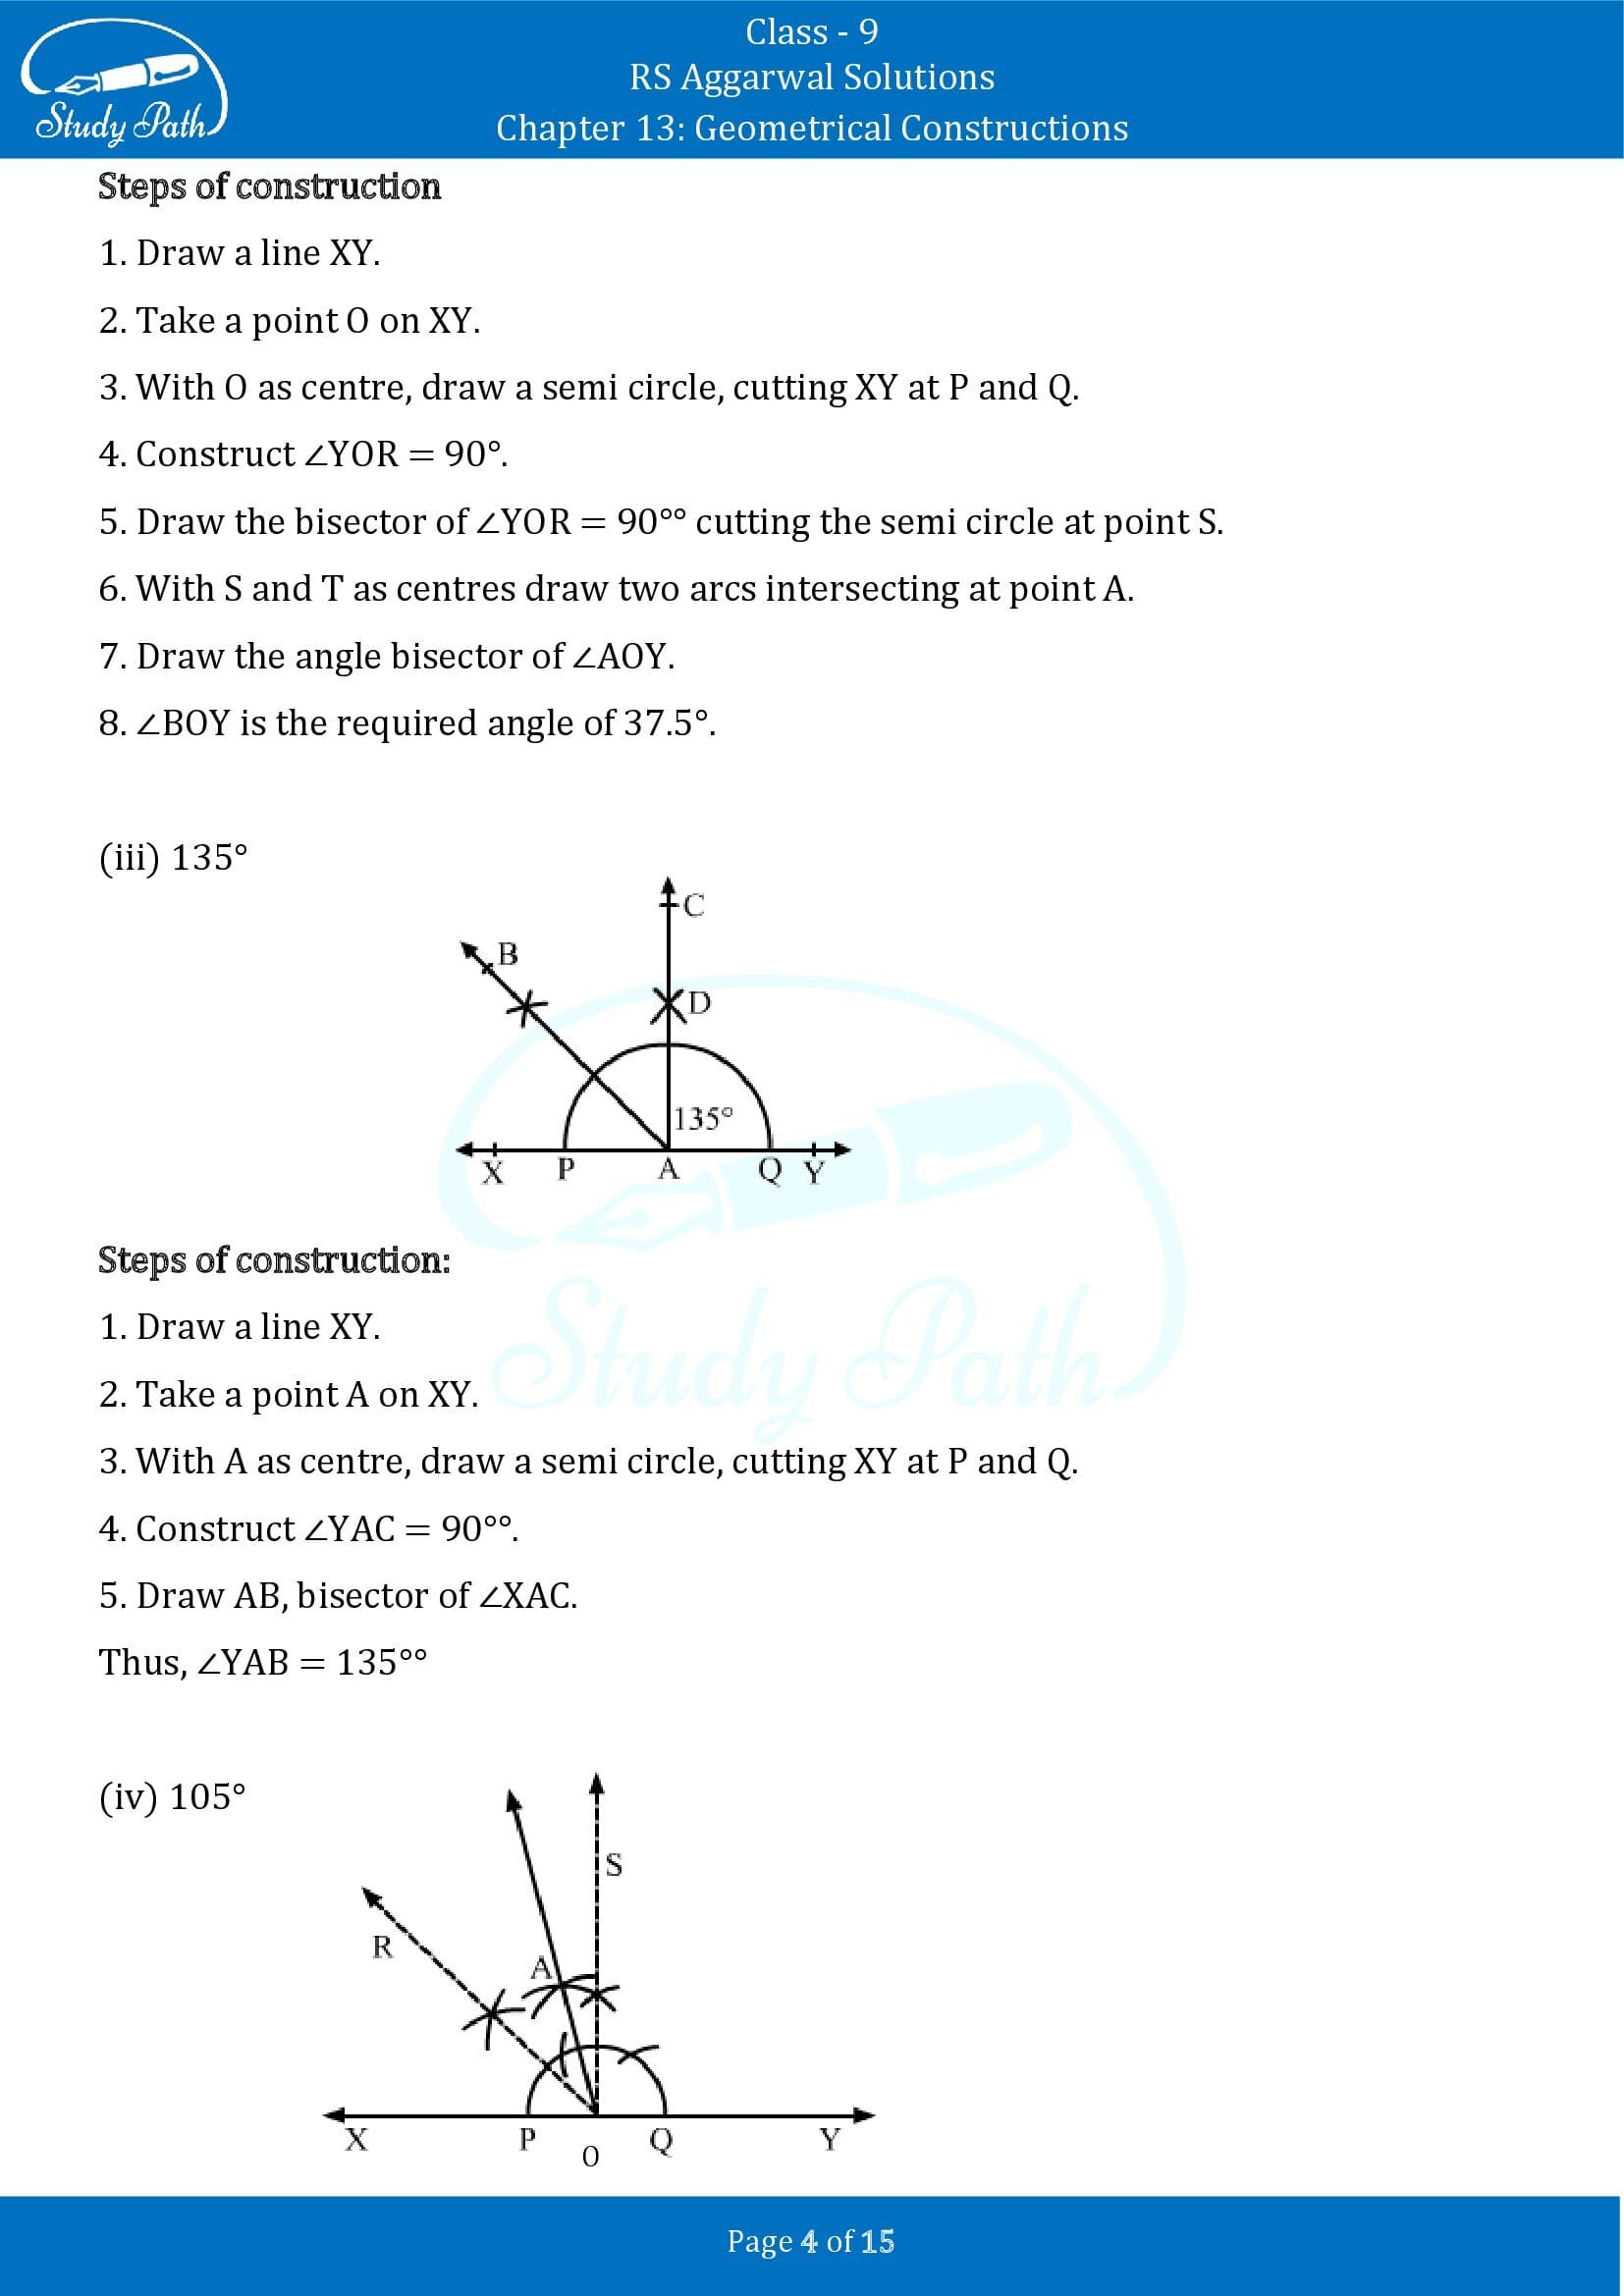 RS Aggarwal Solutions Class 9 Chapter 13 Geometrical Constructions 04